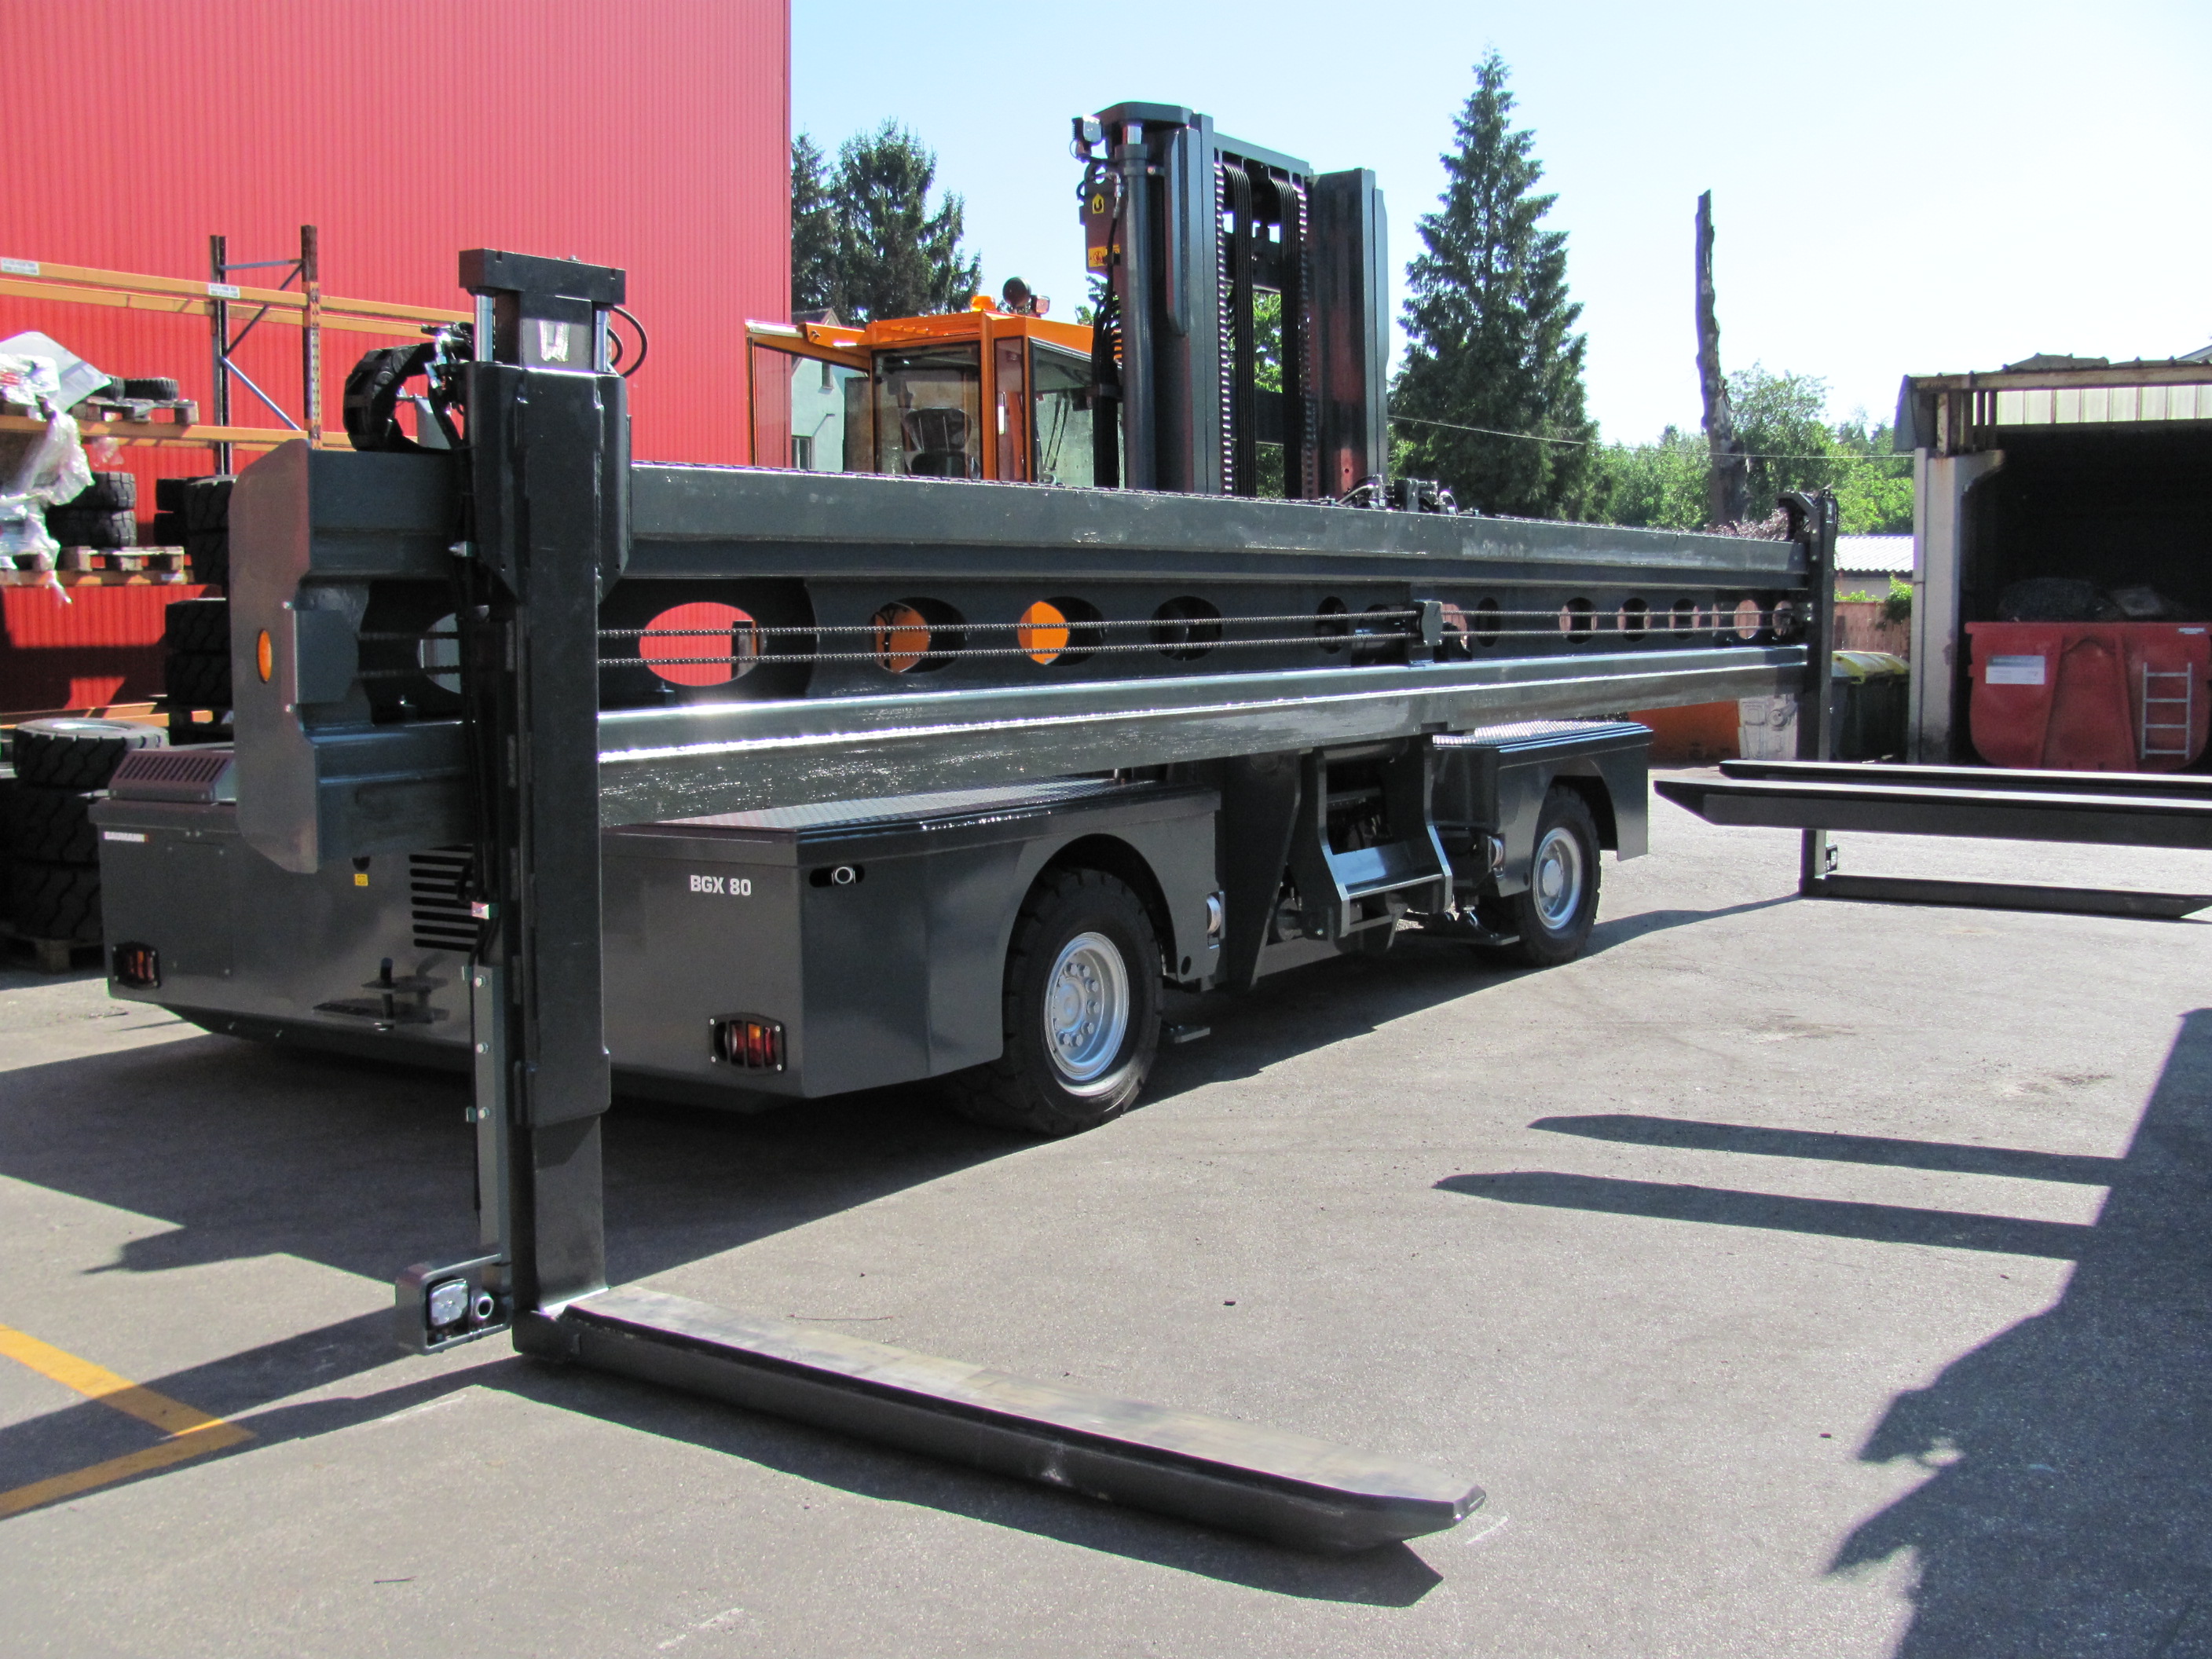 Single forklift fork equipment so-called height shift system for handling long goods to keep the goods horizontally during transport.